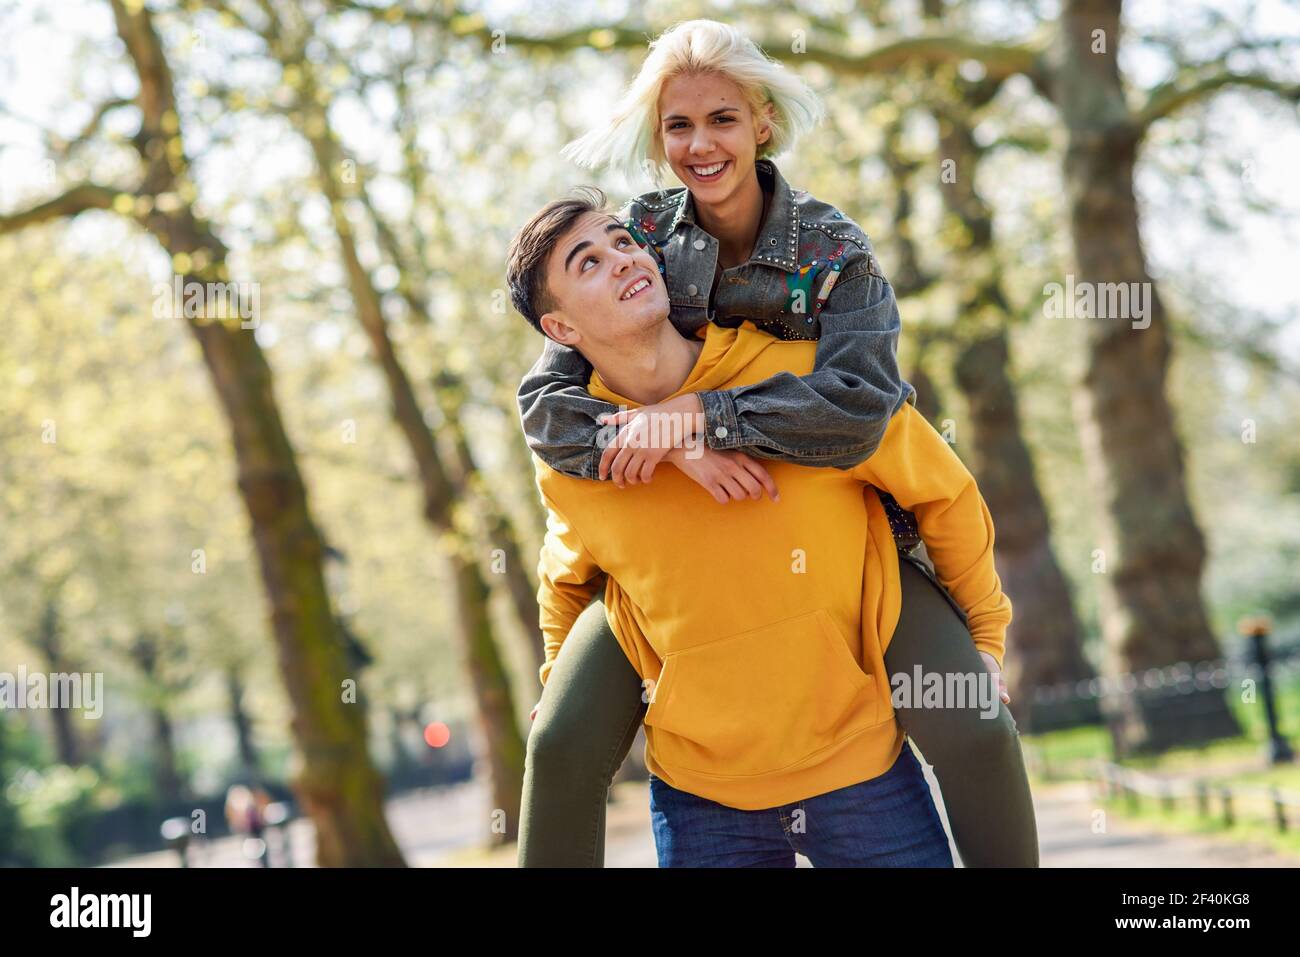 Funny couple in a urban park. Boyfriend carrying his girlfriend on piggyback. Love and tenderness, dating, romance. Lifestyle concept. Funny couple in a urban park. Boyfriend carrying his girlfriend on piggyback. Stock Photo